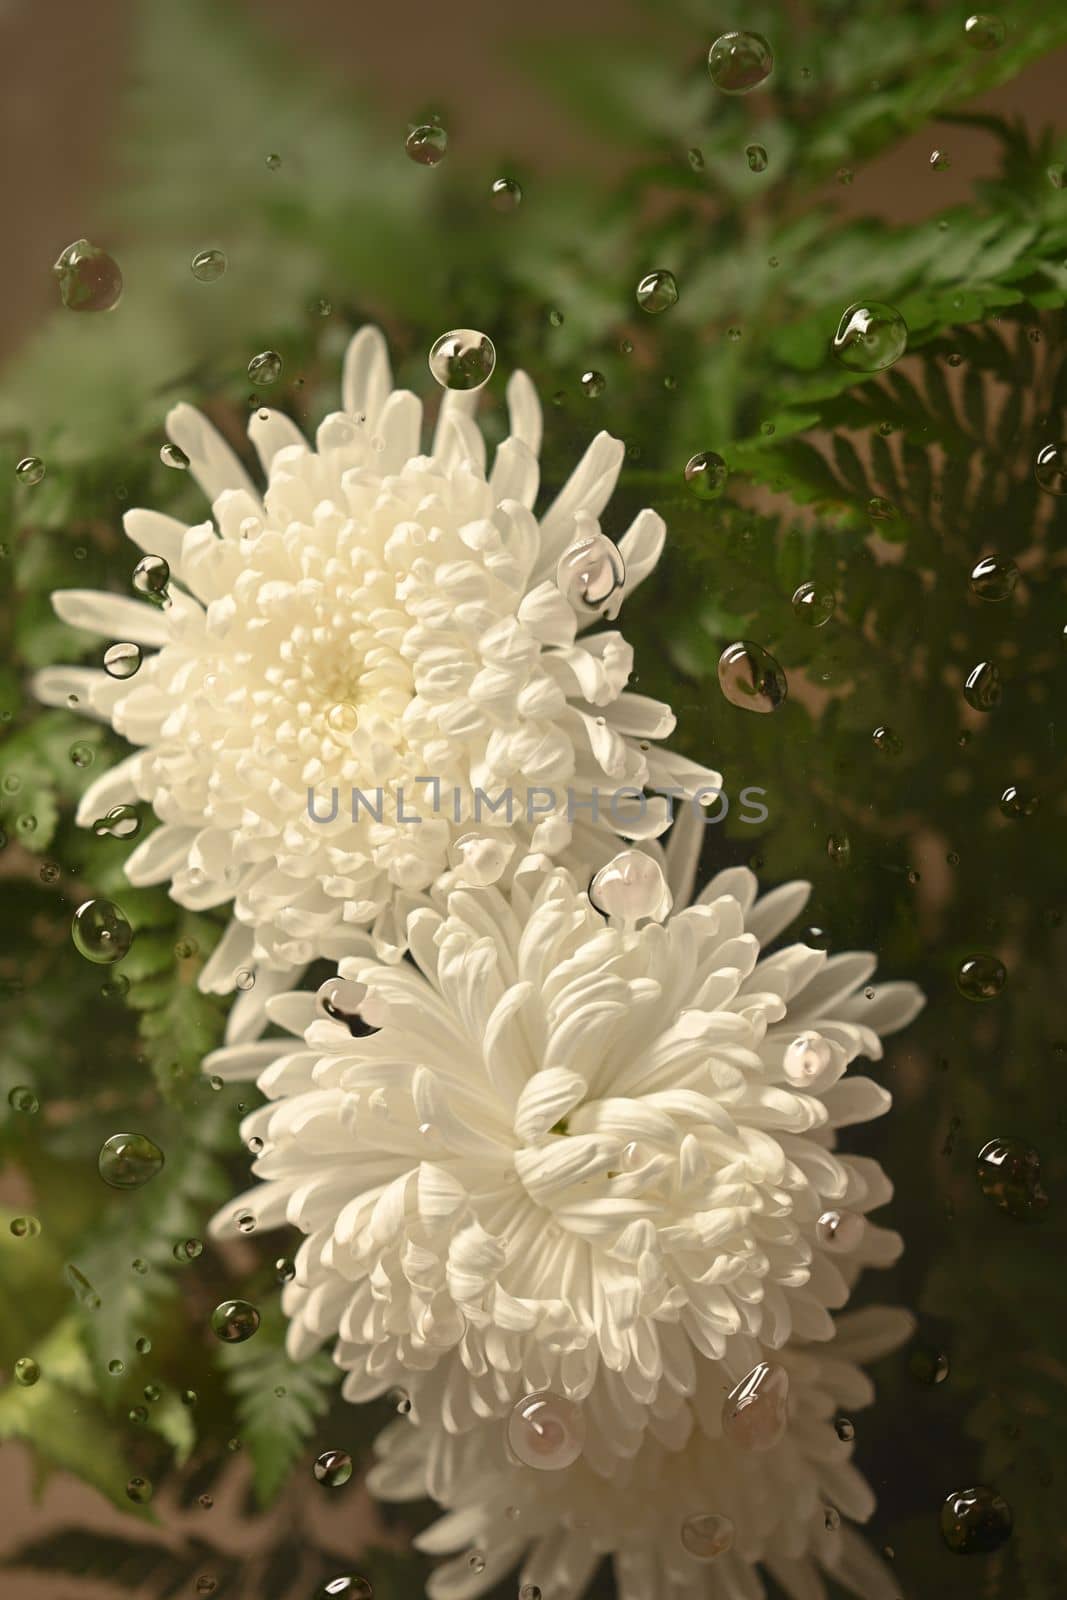 Cold foggy glass with beautiful white chrysanthemums flowers inside with dripping water drop, floral botanical wallpaper.